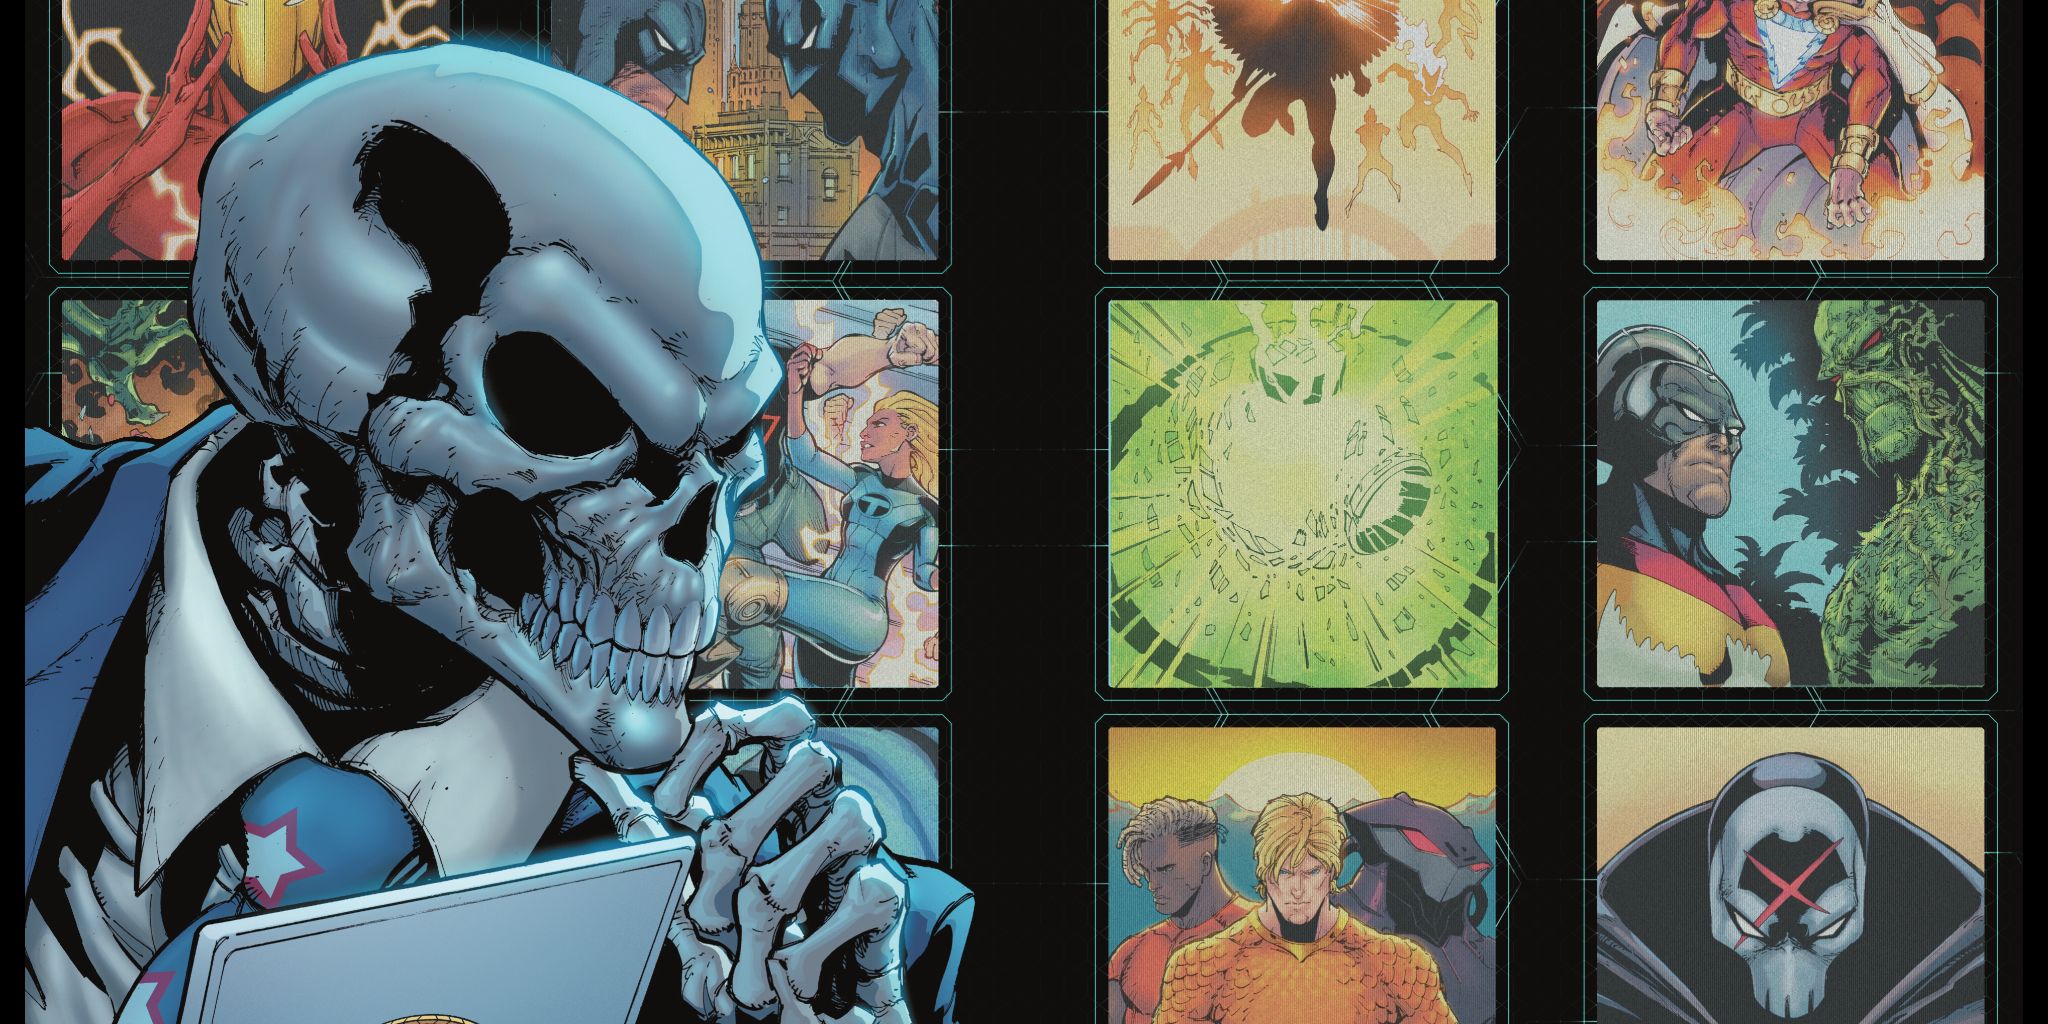 Director Bones monitors the Multiverse in DC's latest ad for upcoming series.